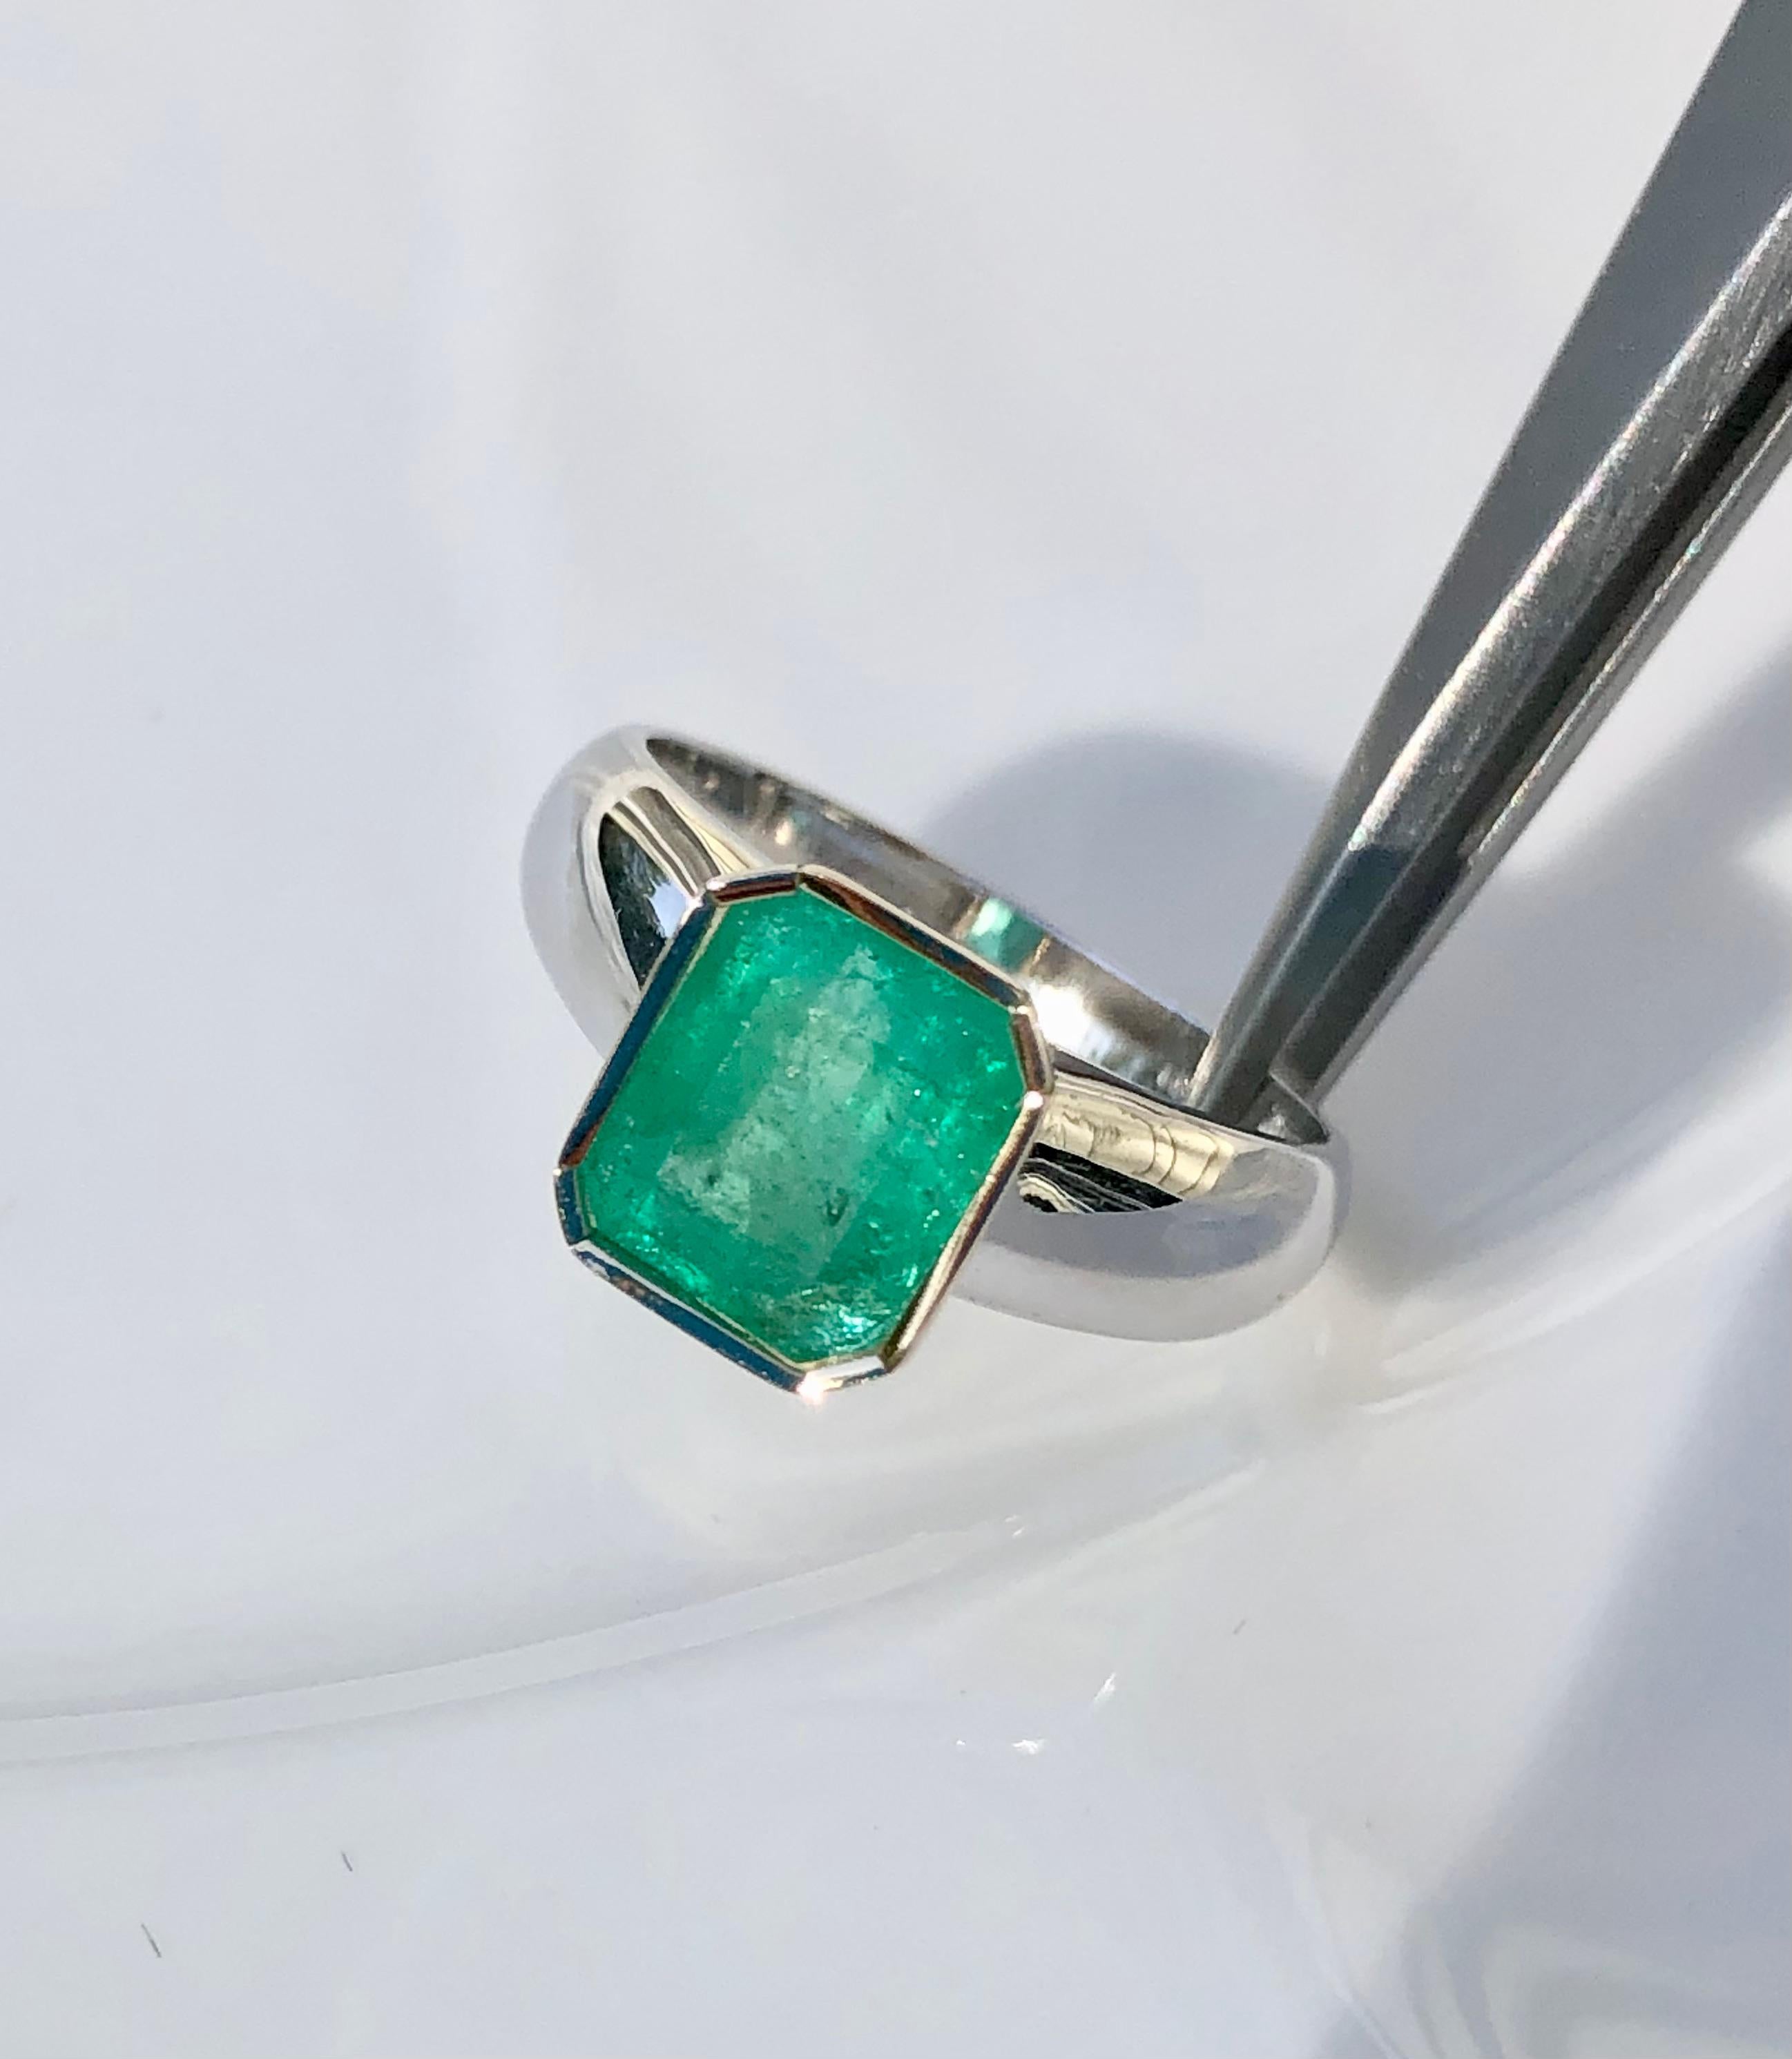 A classic solitaire emerald ring, with a 2.29 carat natural Colombian Emerald emerald cut; medium green in color, and clarity SI,  set in 18K white and yellow gold. 
Currently  ring size  7
Condition New